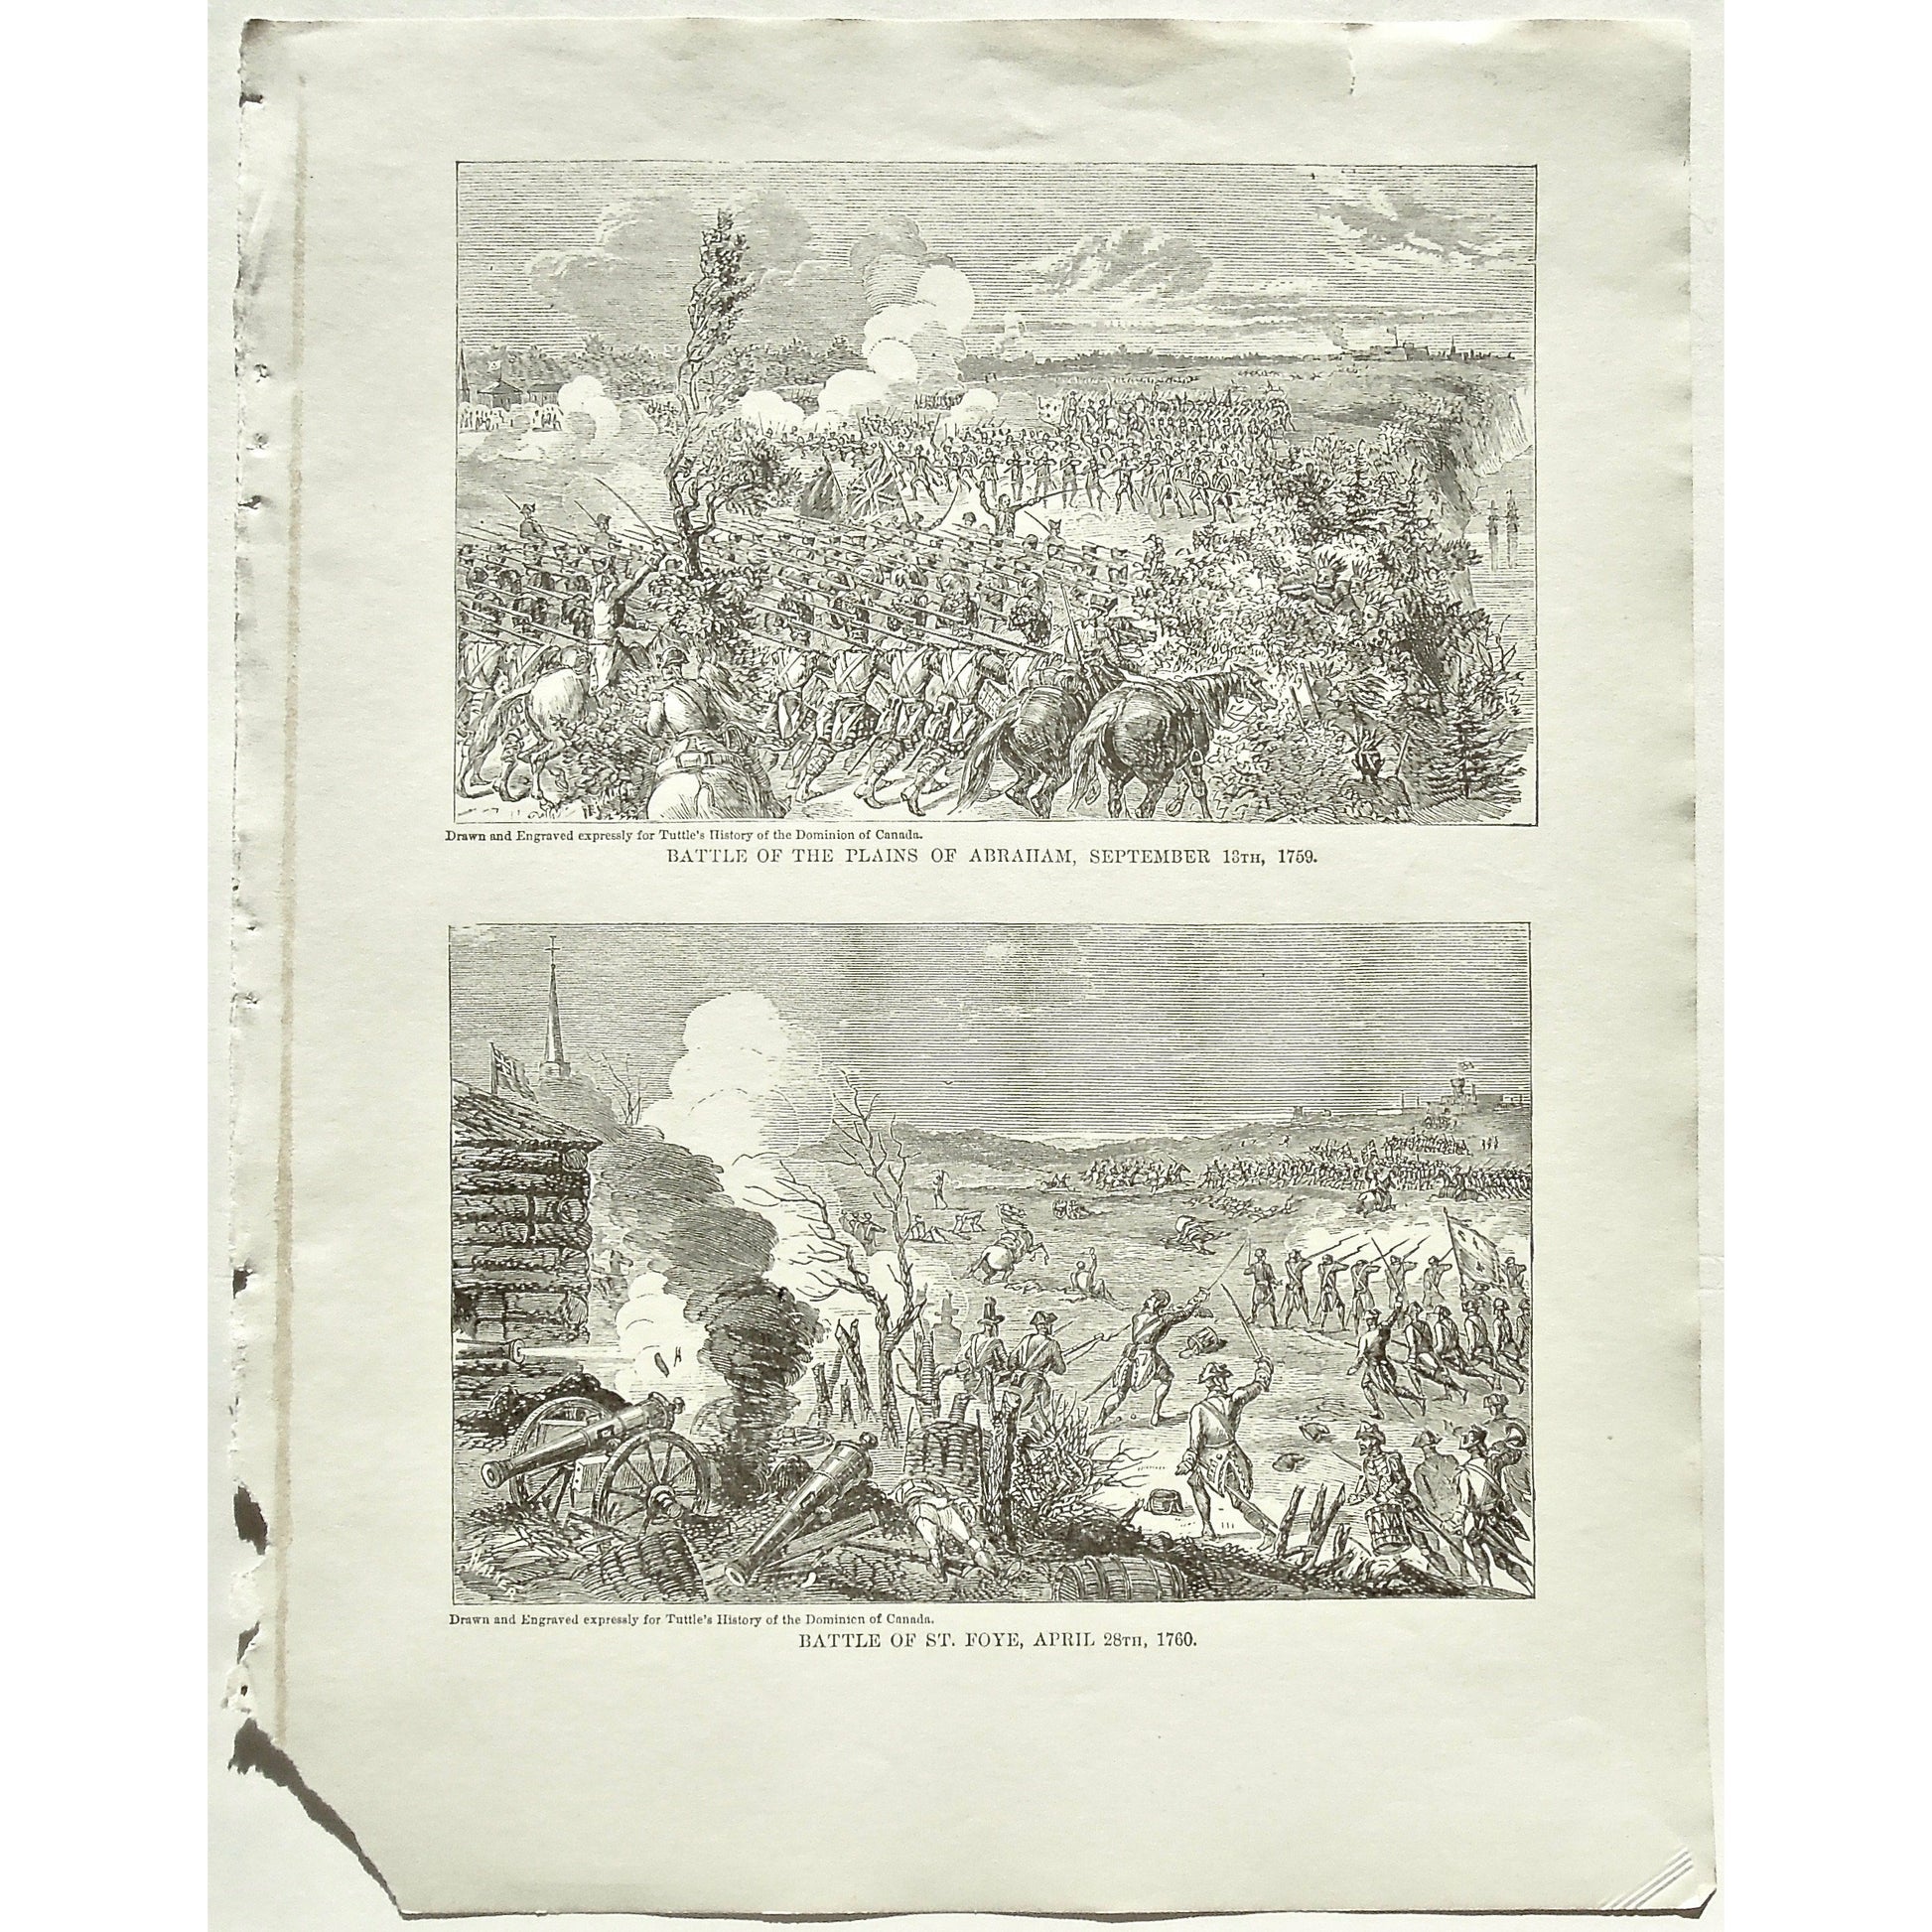 Battle of the Plains of Abraham, Battle, Plains of Abraham, Battles, September 13th, 1759, Battle of St. Foye, St. Foye, April 28th, 1760, Soldiers, Troops, Cavalry, Weapons, Guns, War, Army, Battle Formation, Canon, Drummer, Flag, Union Jack, British Flag, British Troops, English Flag, English Troops, Tuttle, Charles Tuttle, History of the Dominion, Popular History of the Dominion, Downie, Bigney, History, Dominion, Canada, Canadian History, Antique, Antique Print, Steel Engraving, Engraving, Prints, Print